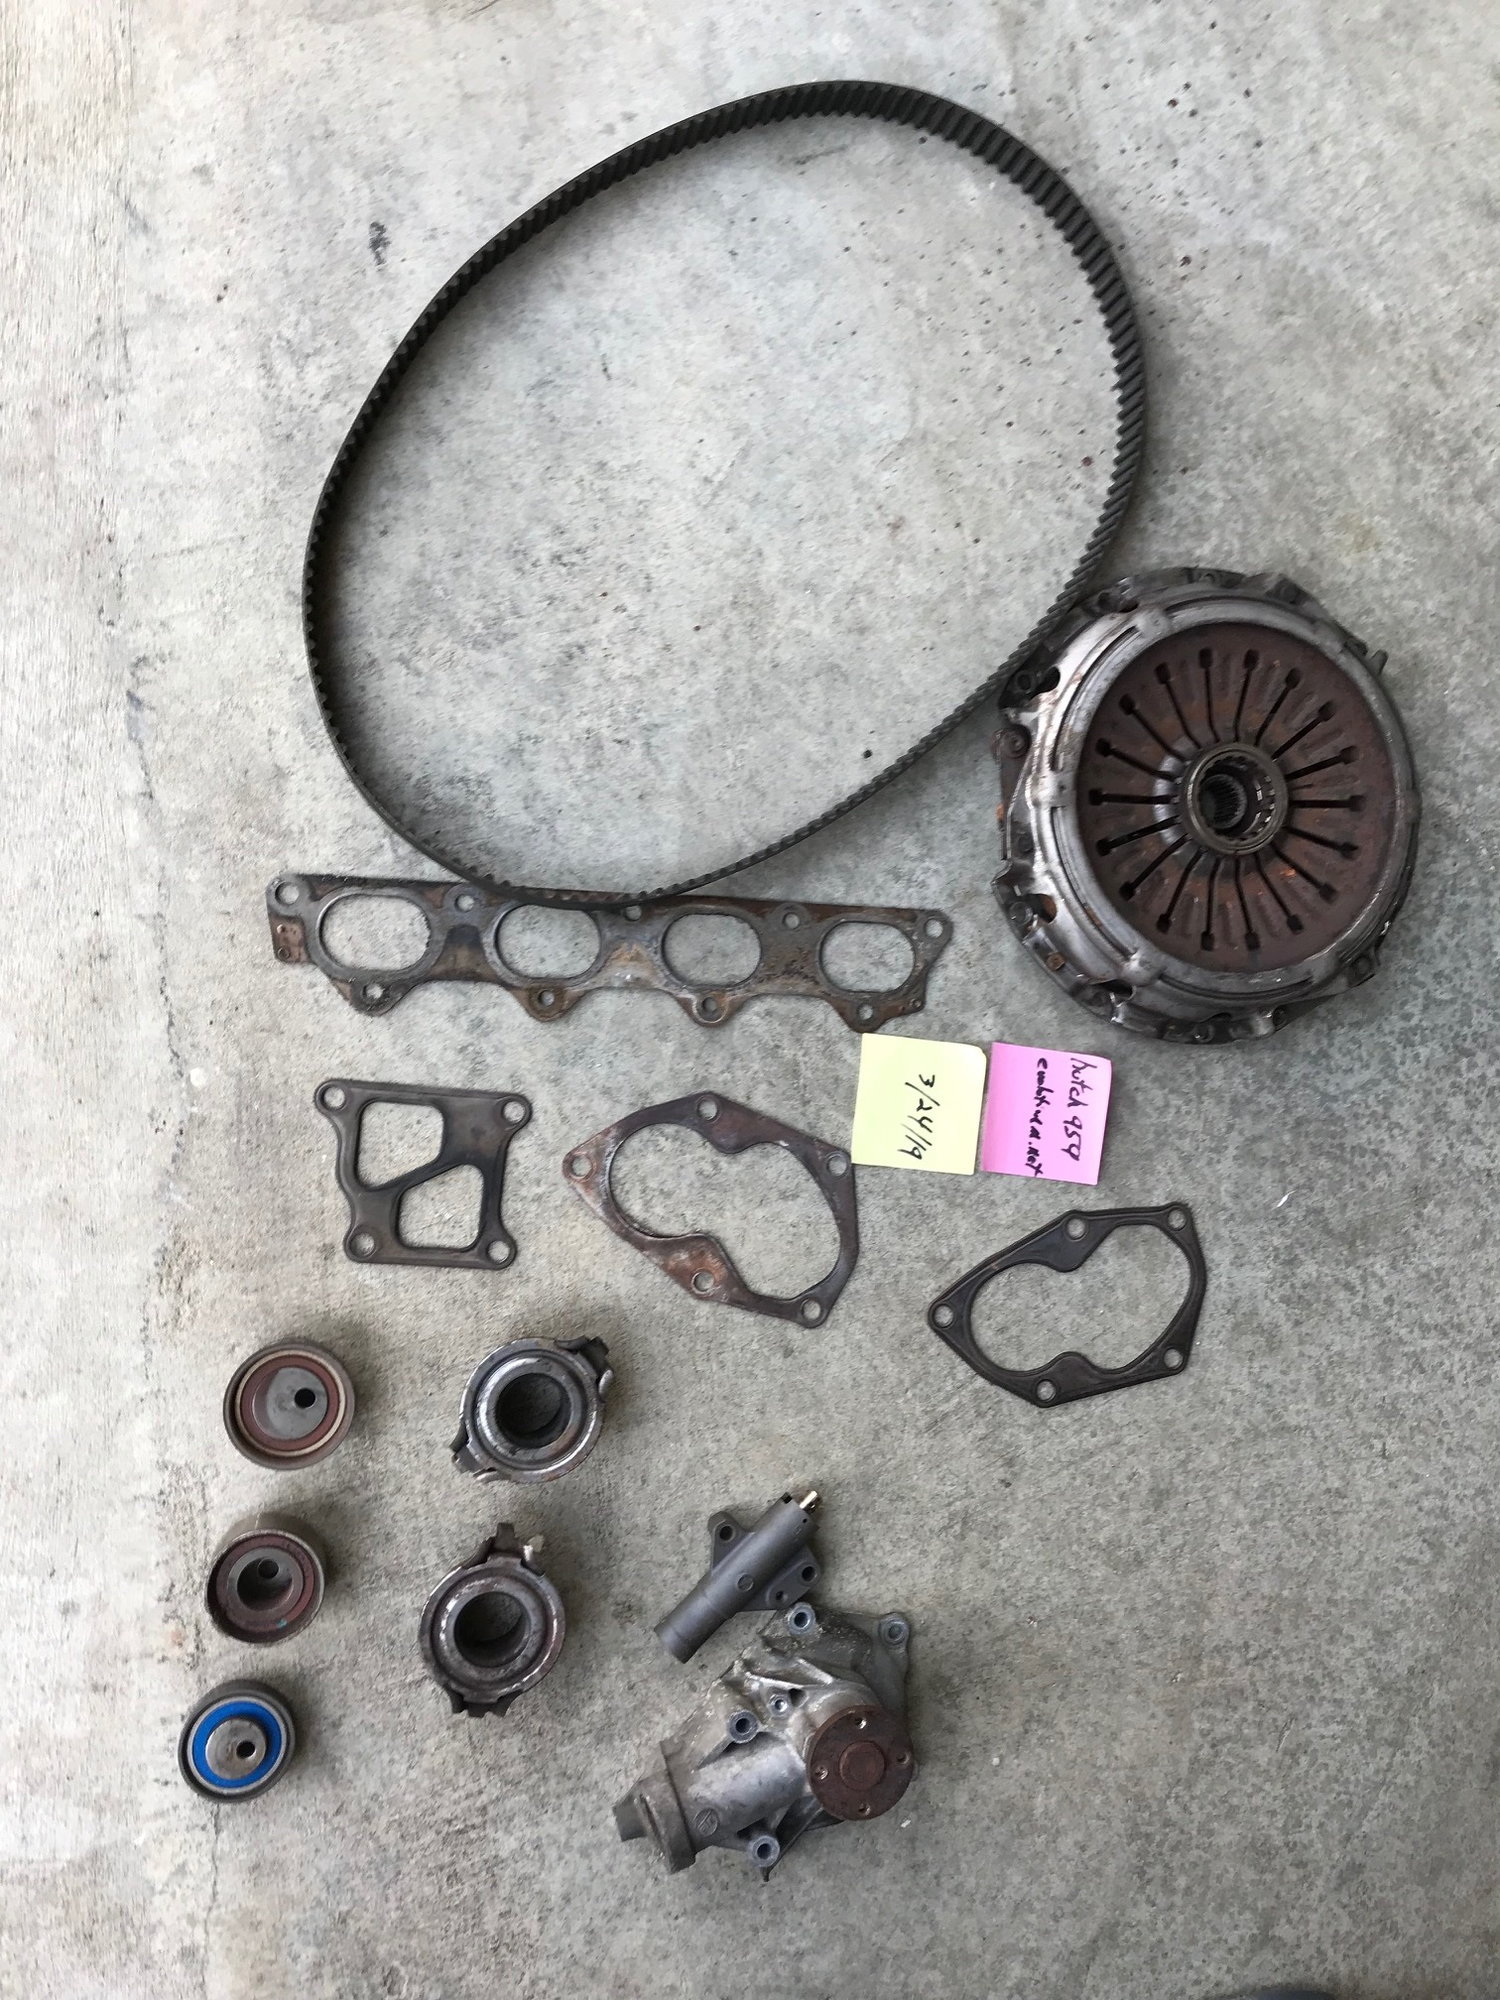 Drivetrain - Clutch and timing parts - Used - 2006 Mitsubishi Lancer Evolution - Signal Mountain, TN 37377, United States